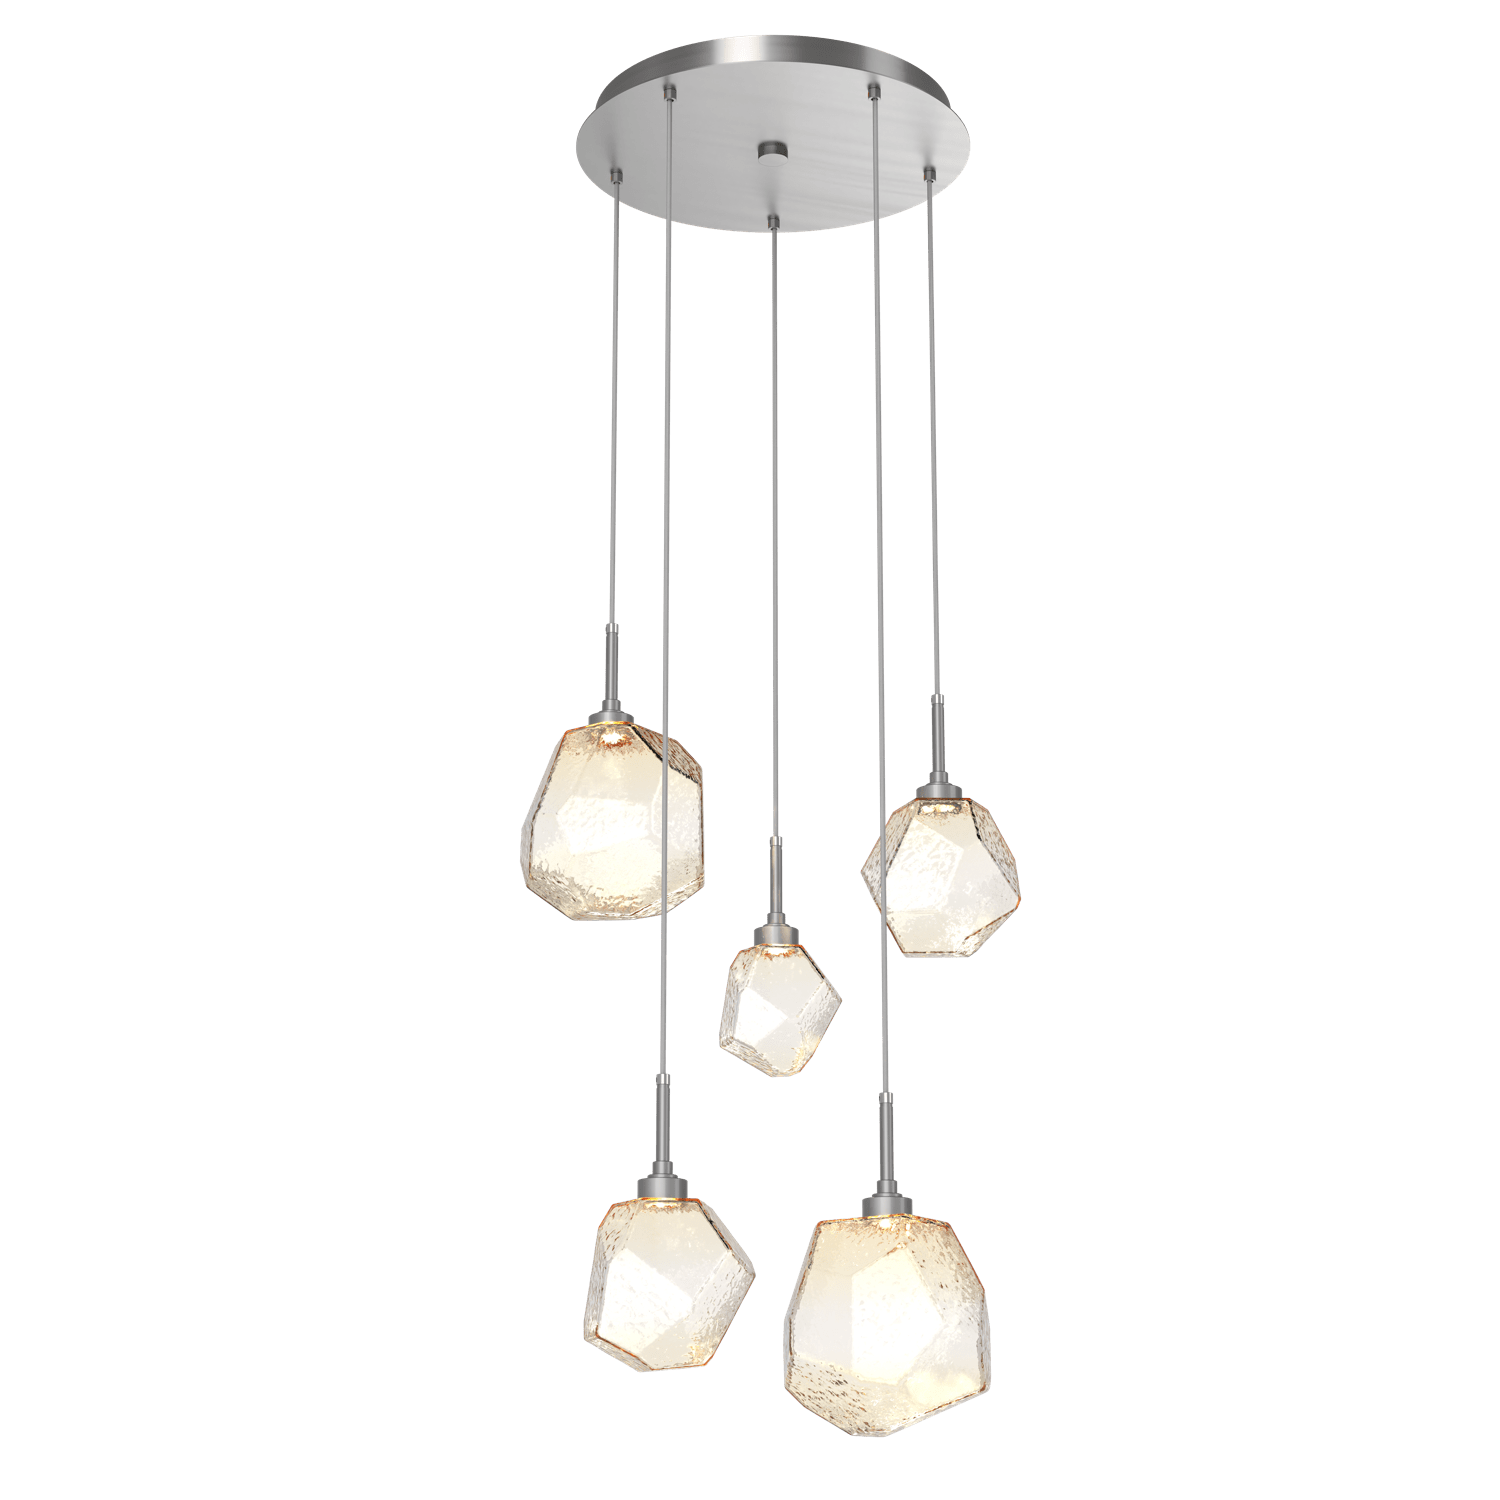 CHB0039-05-SN-A-Hammerton-Studio-Gem-5-light-round-pendant-chandelier-with-satin-nickel-finish-and-amber-blown-glass-shades-and-LED-lamping